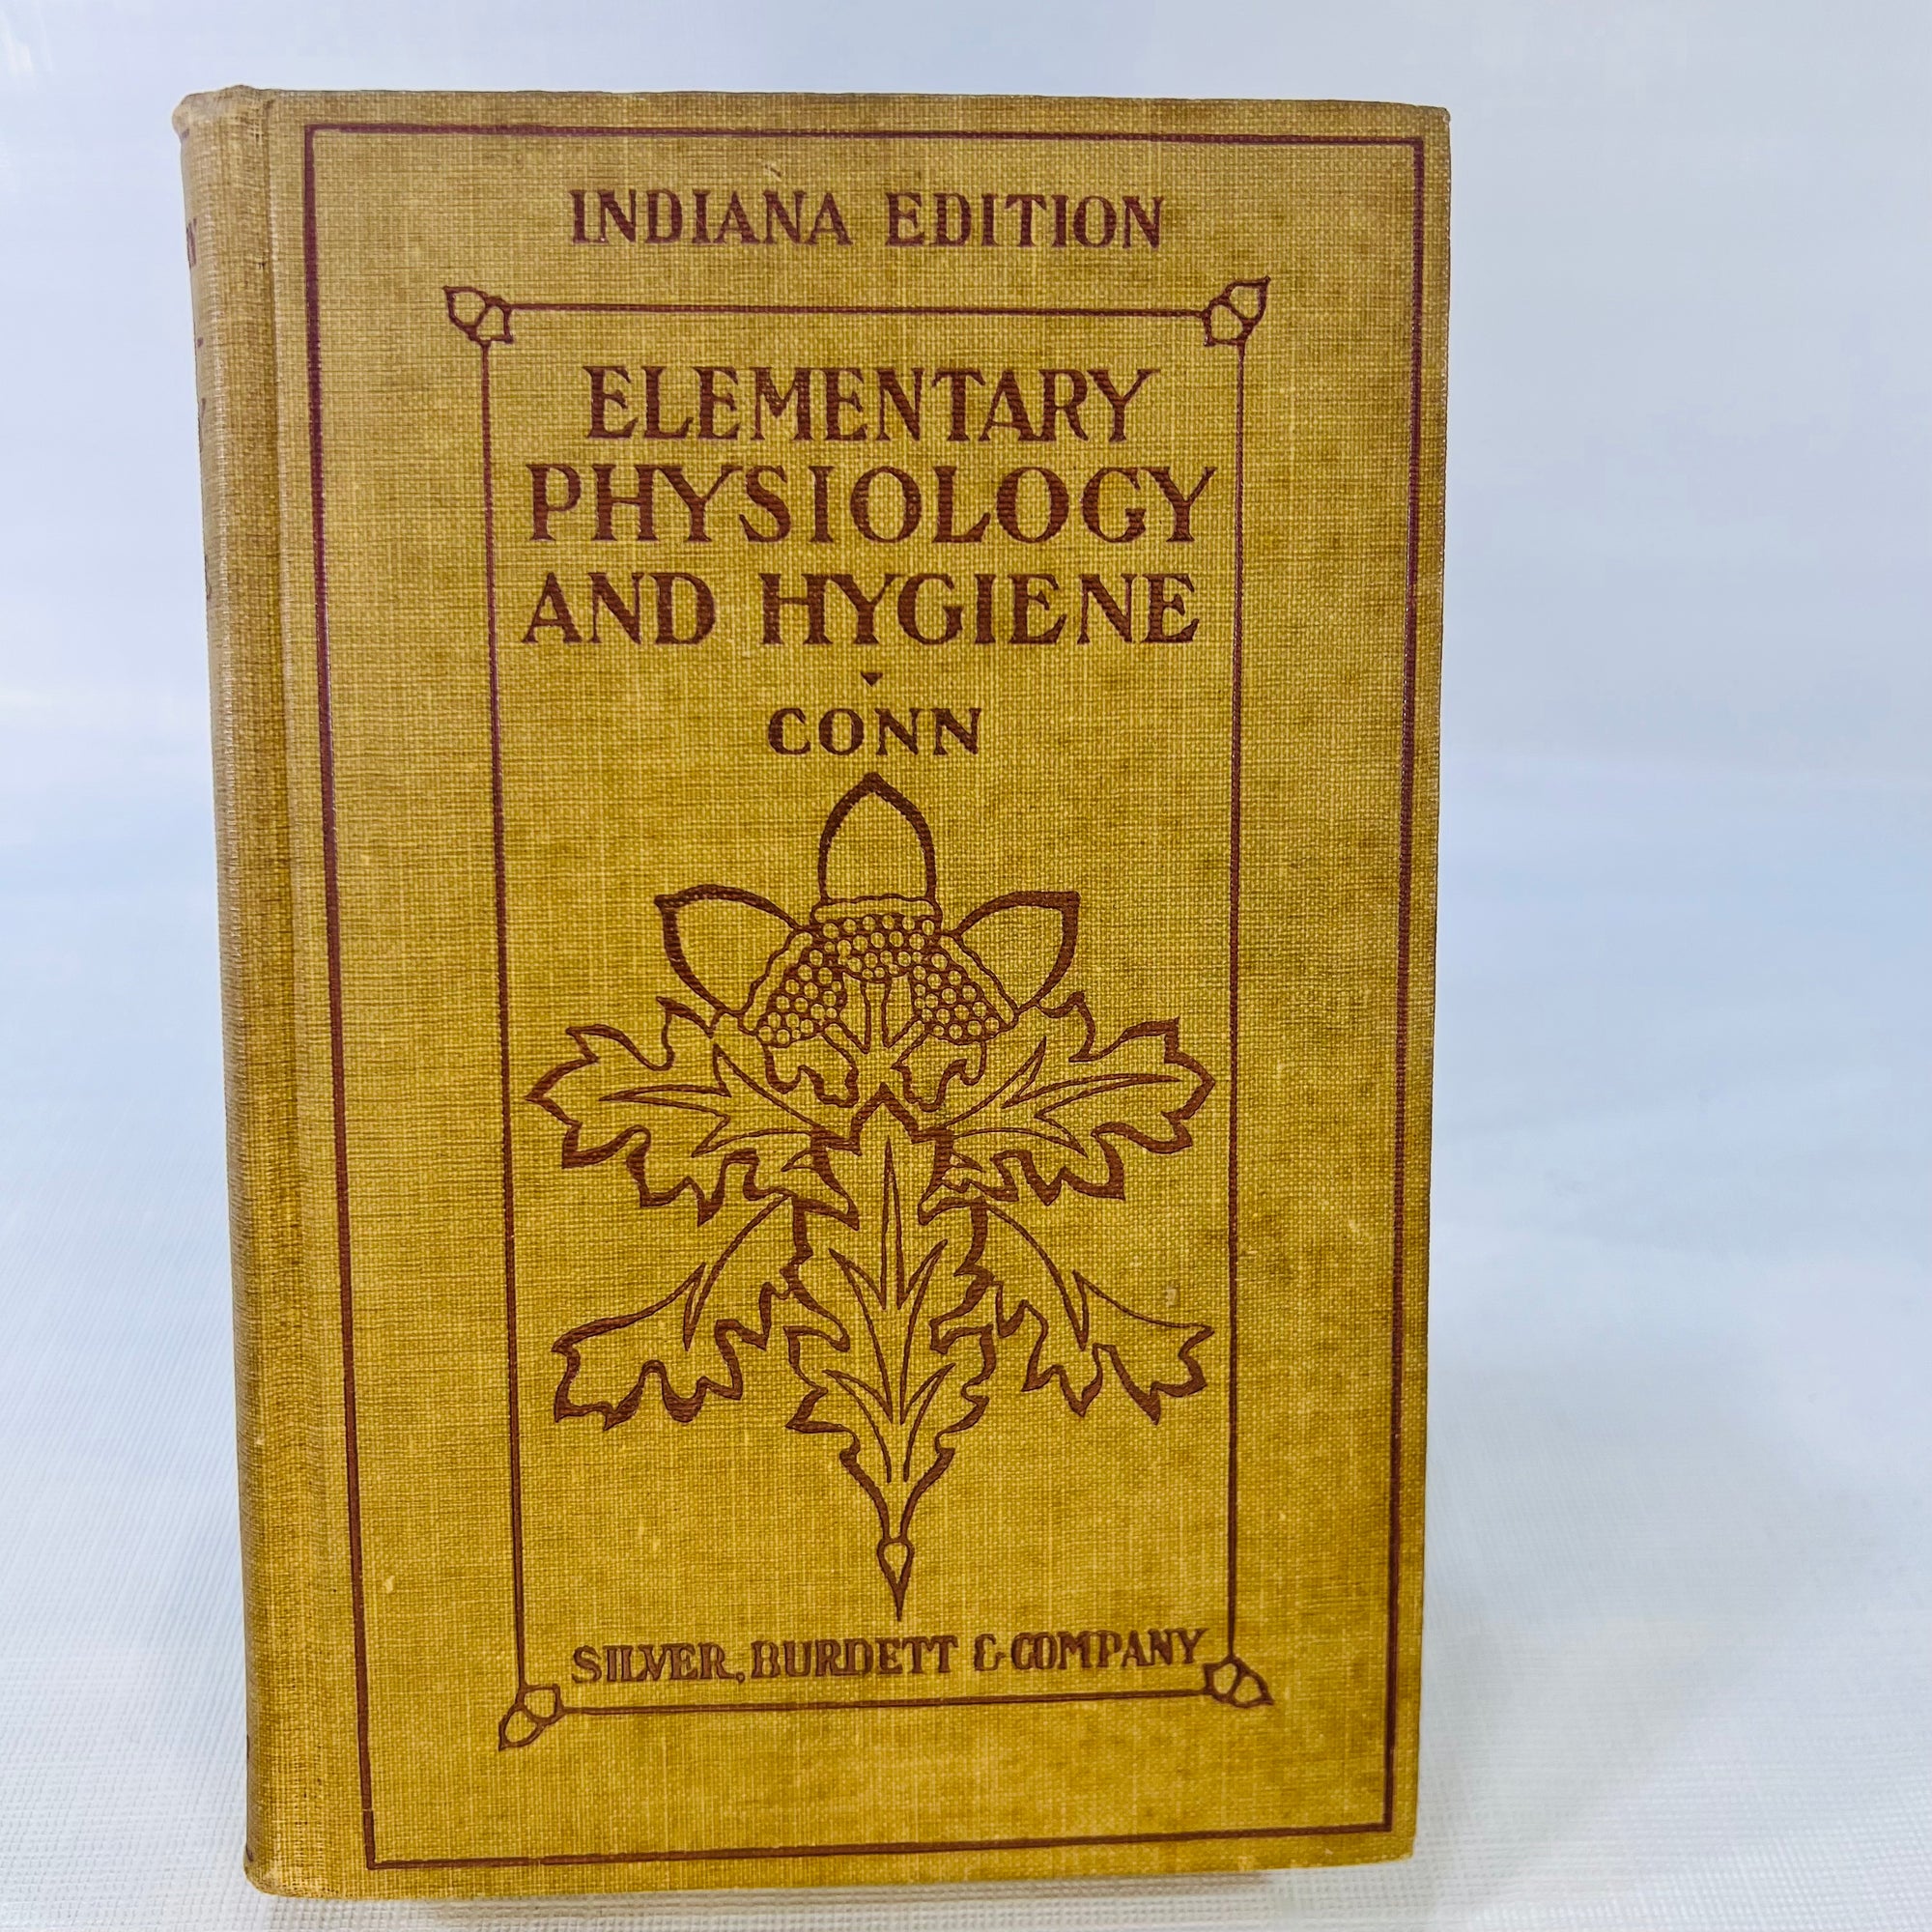 Elementary Physiology and Hygiene For Use in Schools by H.W. Conn 1906 Phd Silver, Burdett and Company